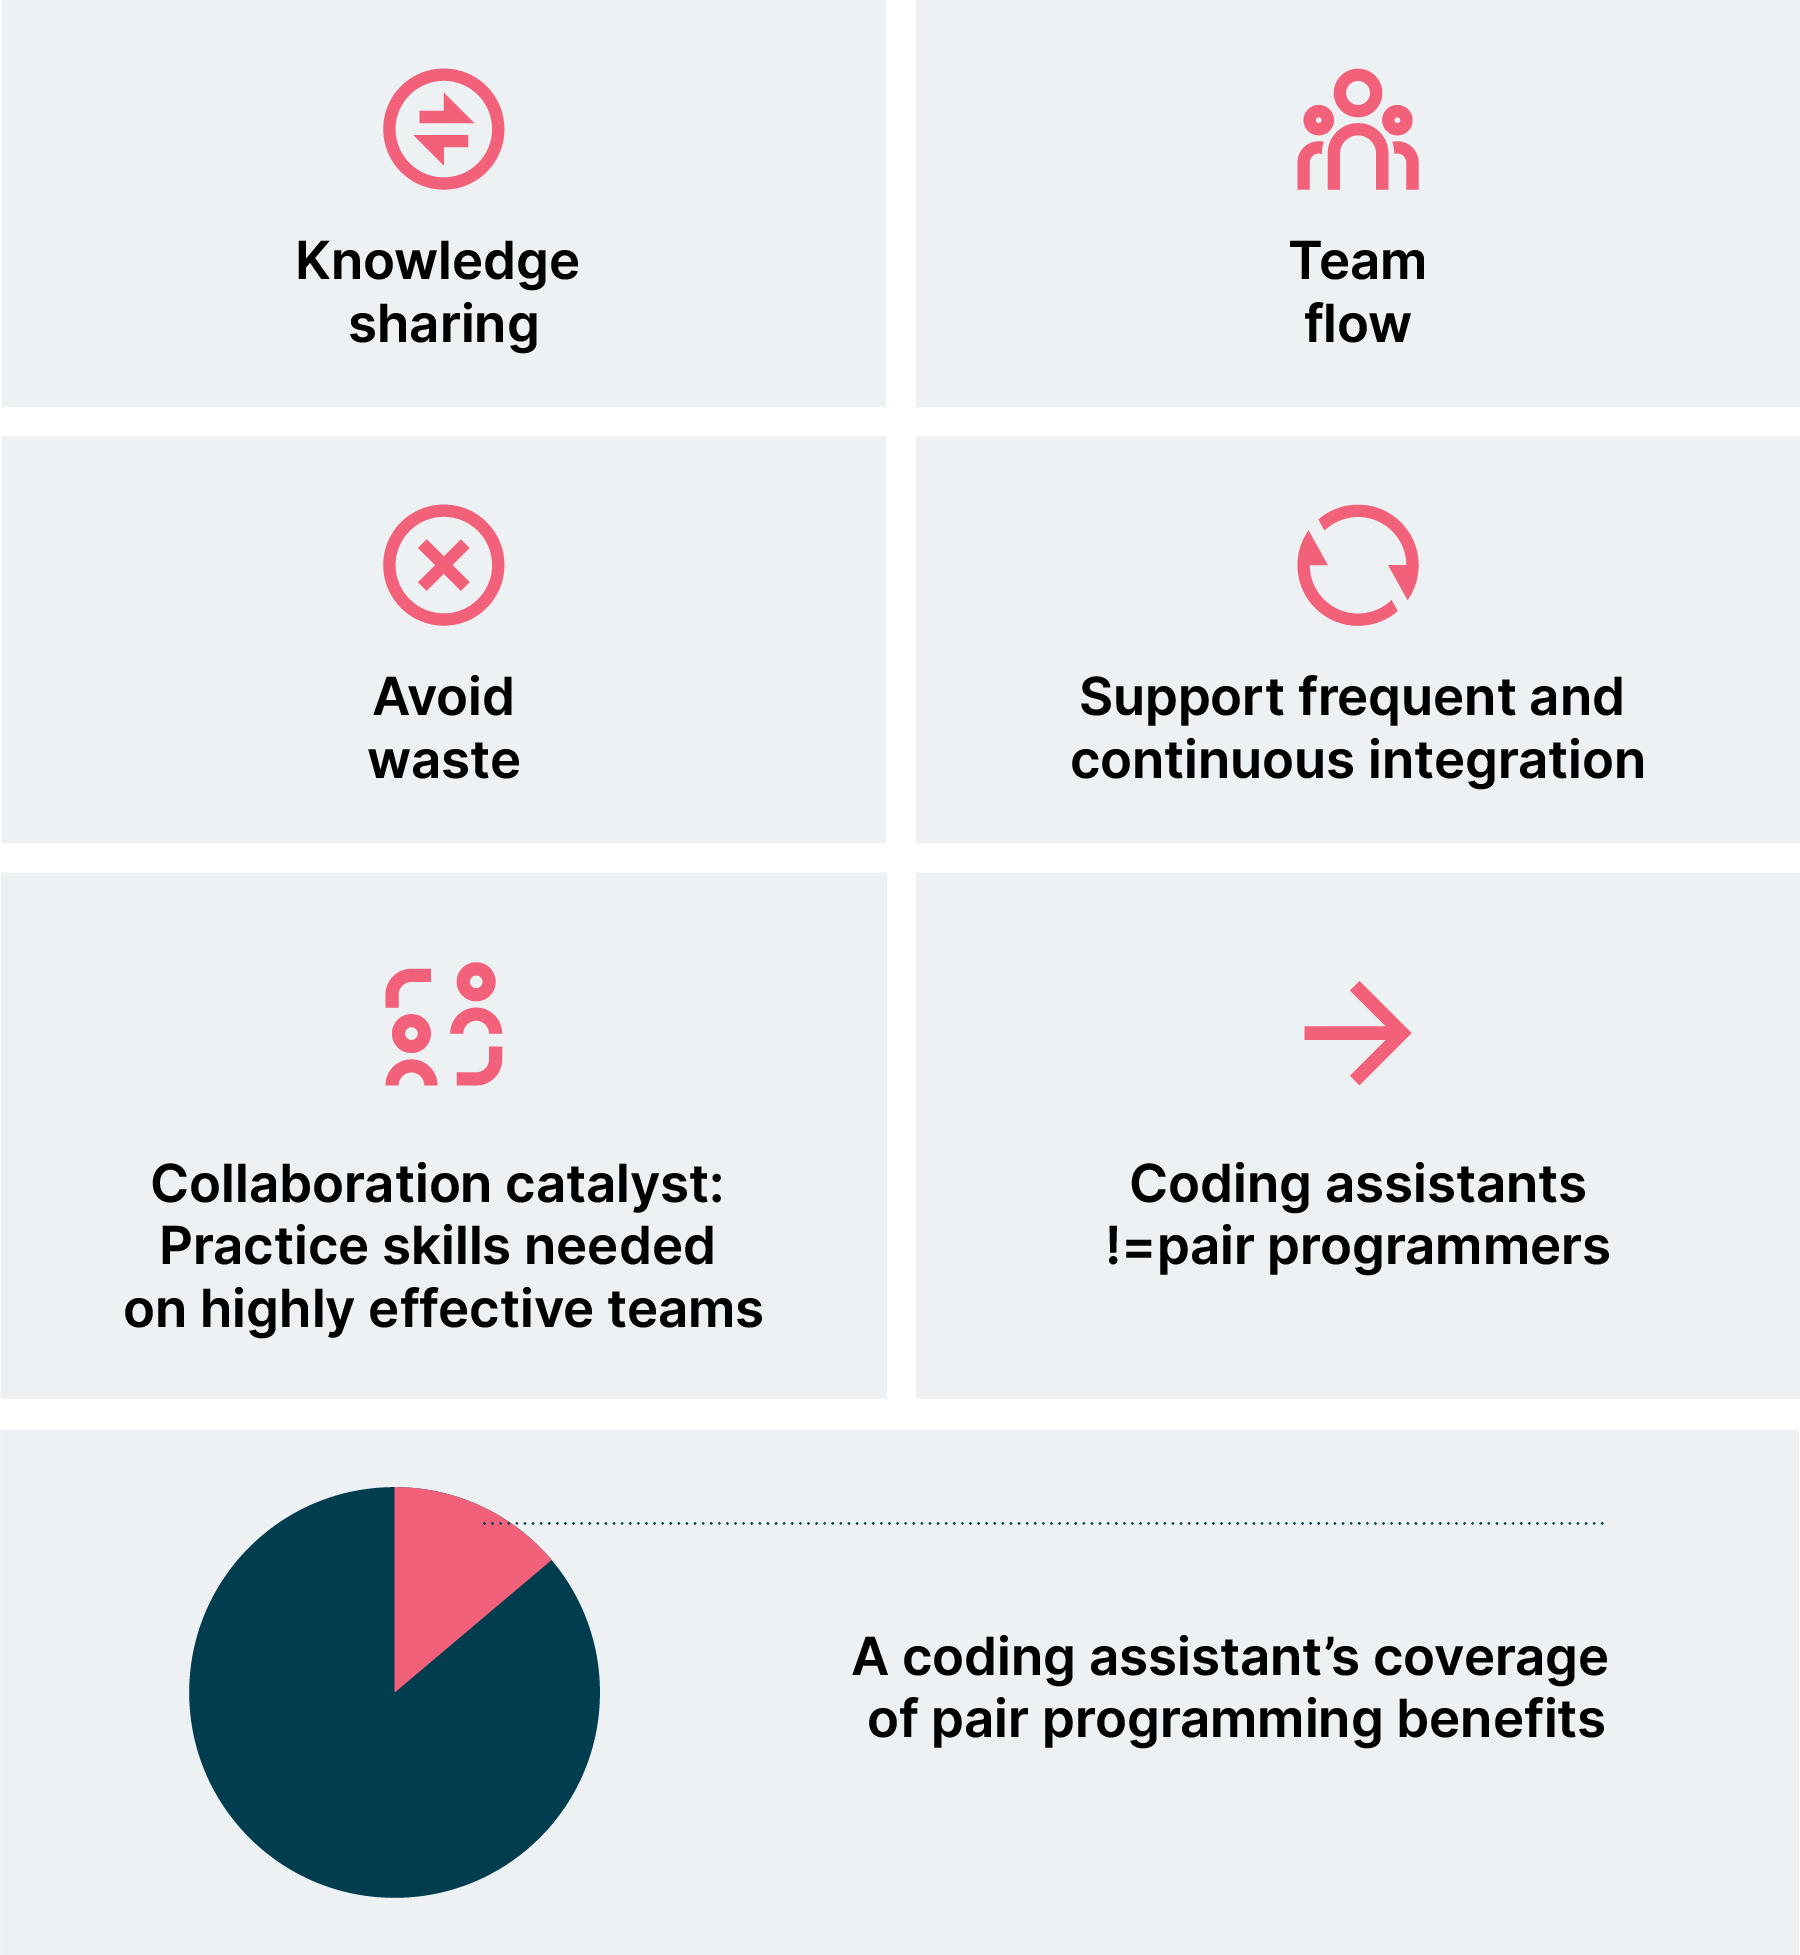 An overview showing the benefits and purposes of pair programming, in 5 categories: 1. “one plus one is greater than two”, for things like knowledge exchange or onboarding; 2. Flow, for things like keeping focus and limiting work in process; 3. Avoid waste, referencing the 7 wastes of software development; 4. Continuous Integration, as in integrating multiple times a day, mentioning shorter code review loops; and 5., Practice skills needed on highly effective teams, like task organization, empathy, communication, feedback